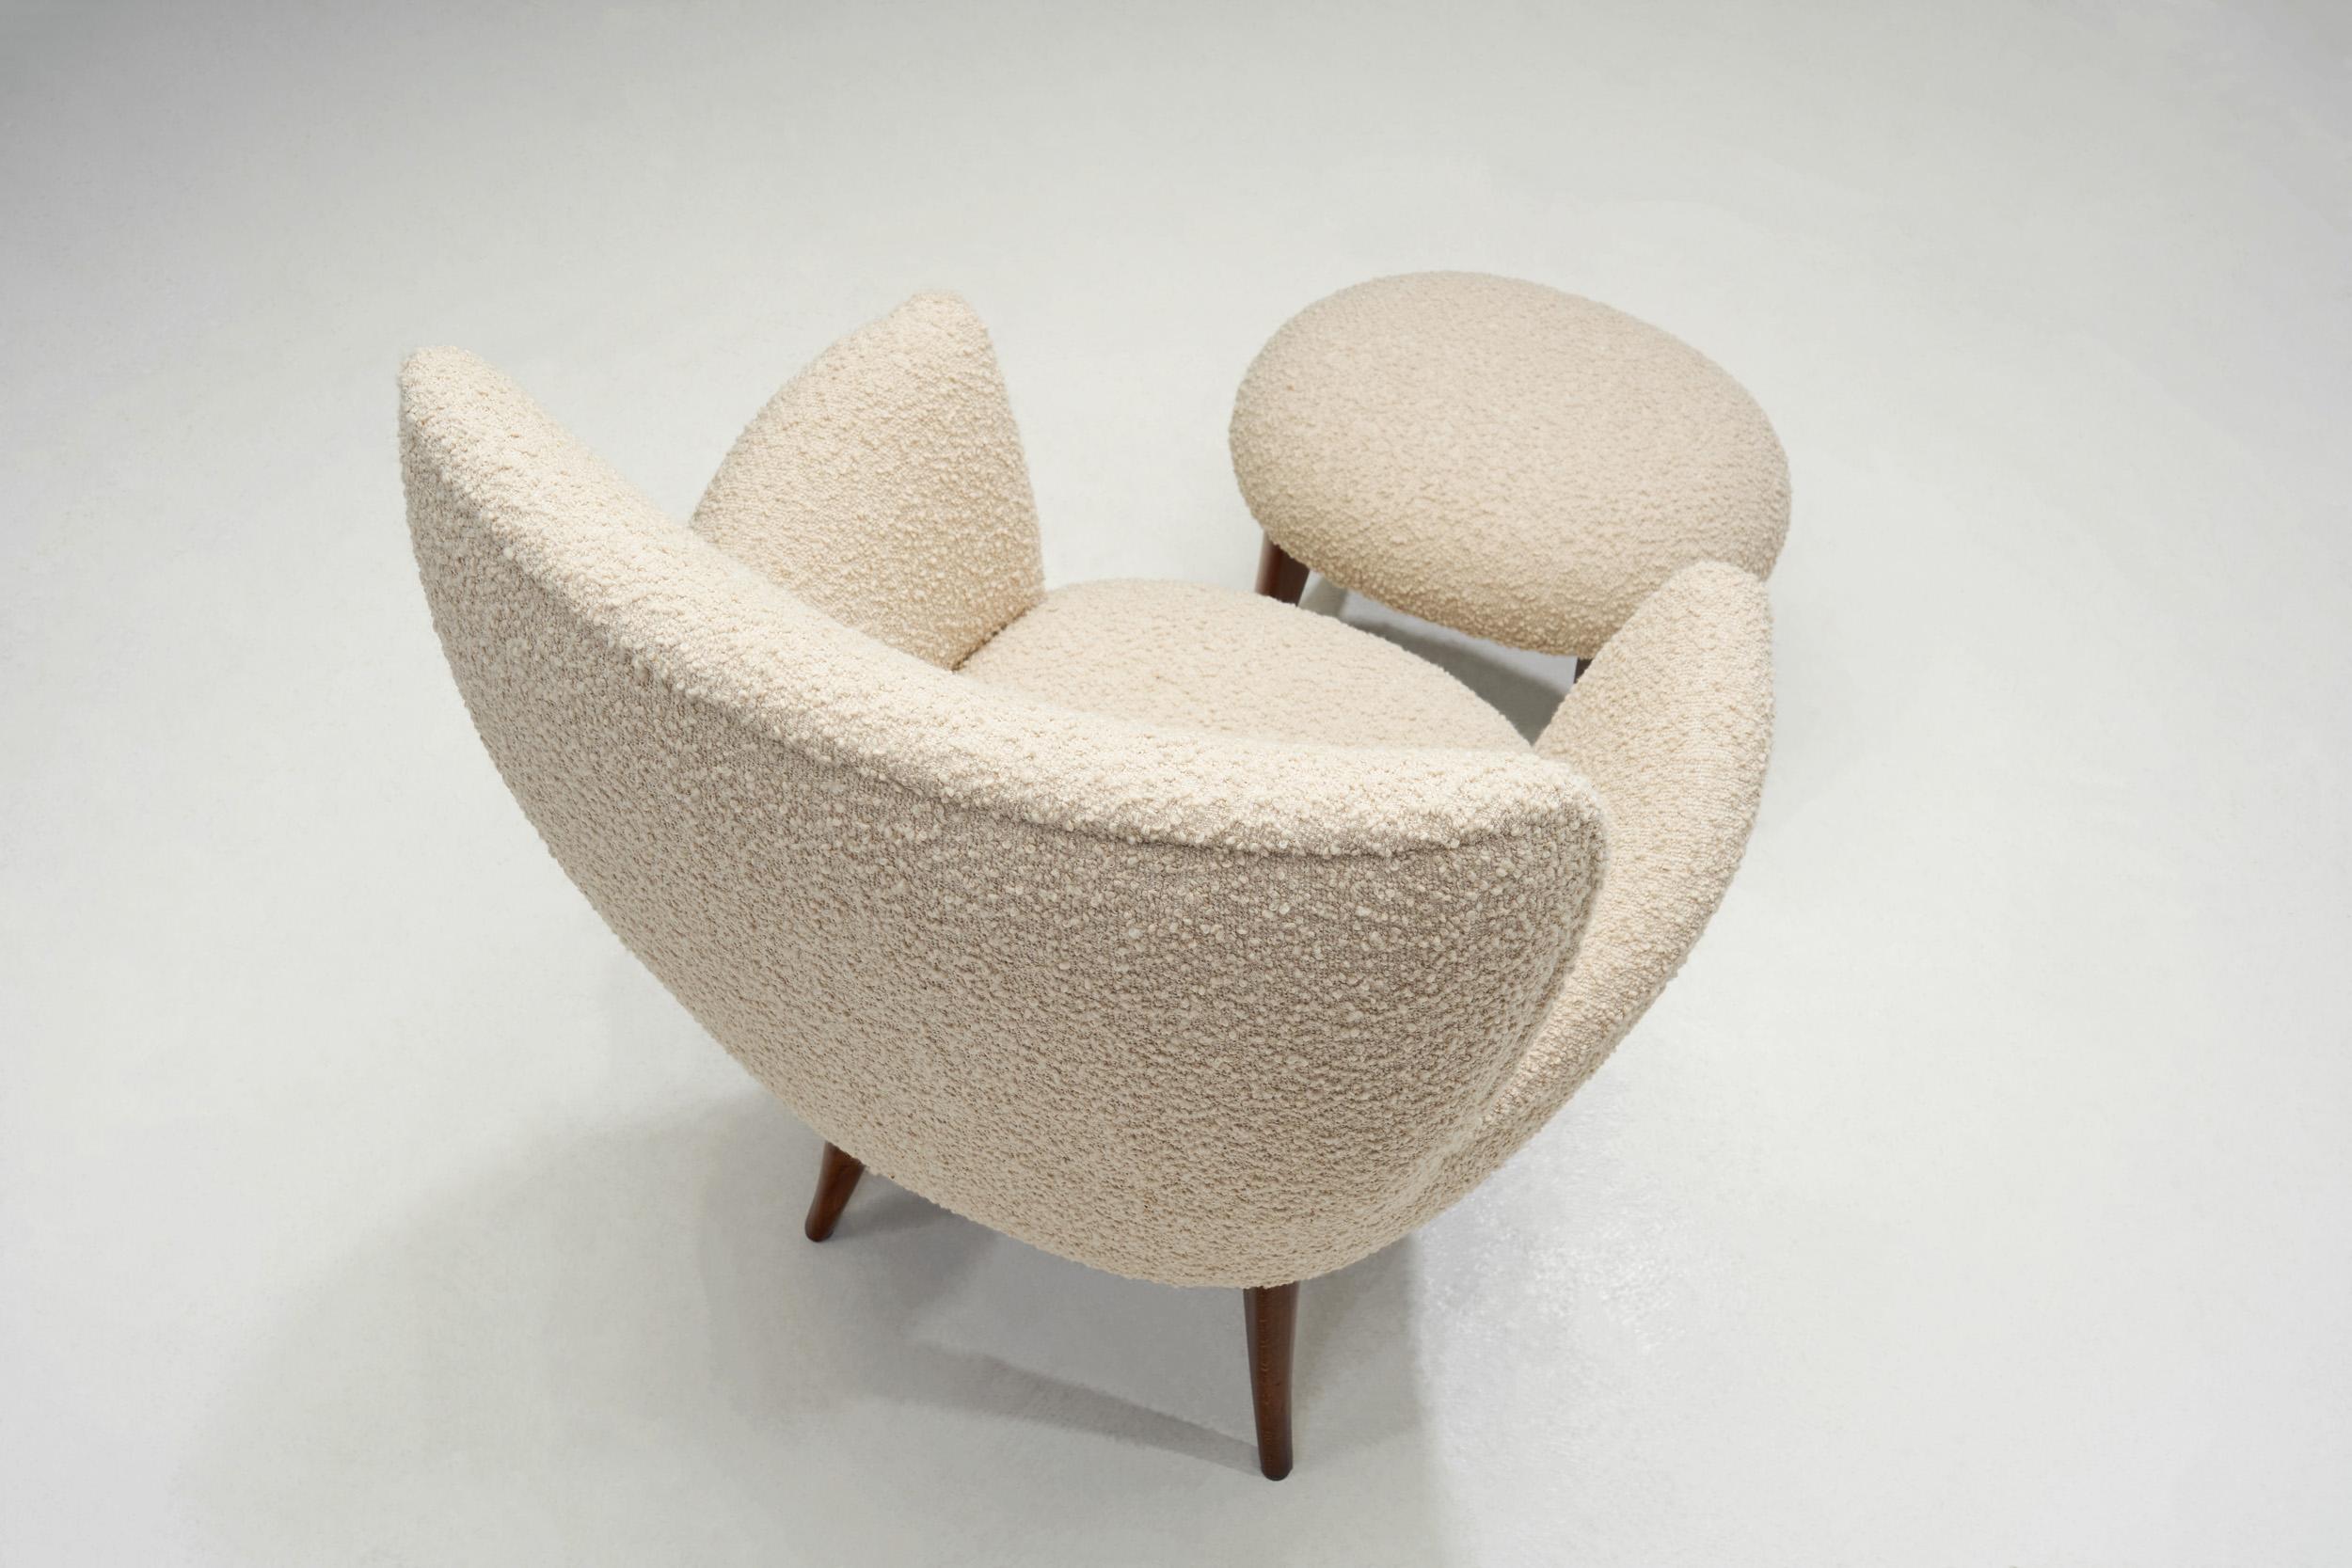 Fabric European Cabinetmaker Chairs Upholstered in Bouclé, Europe ca 1950s For Sale